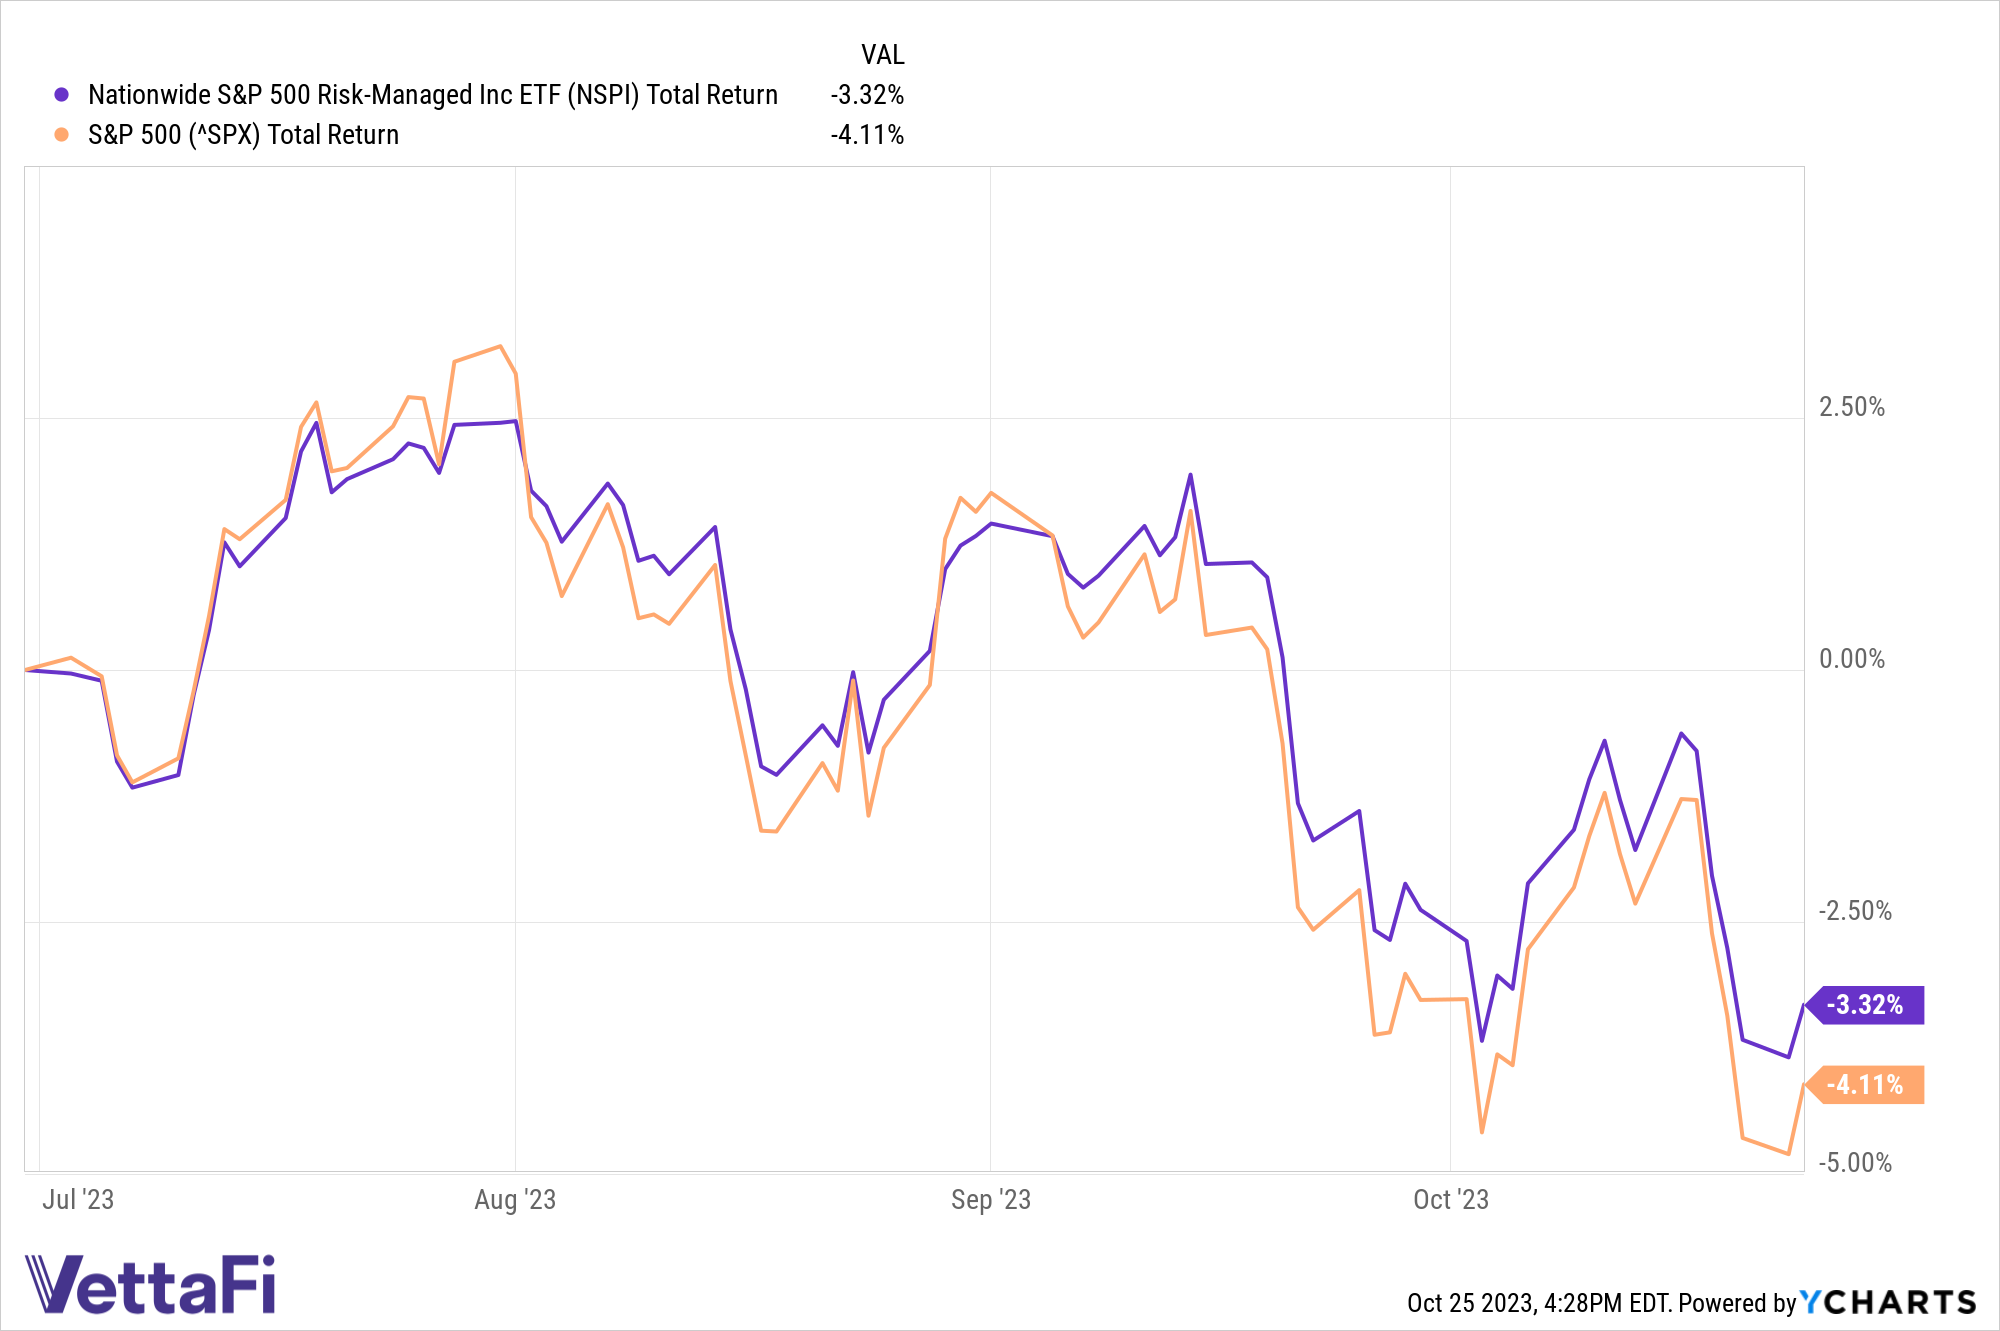 Total returns of NSPI and the S&P 500 from July 1 through October 24. 